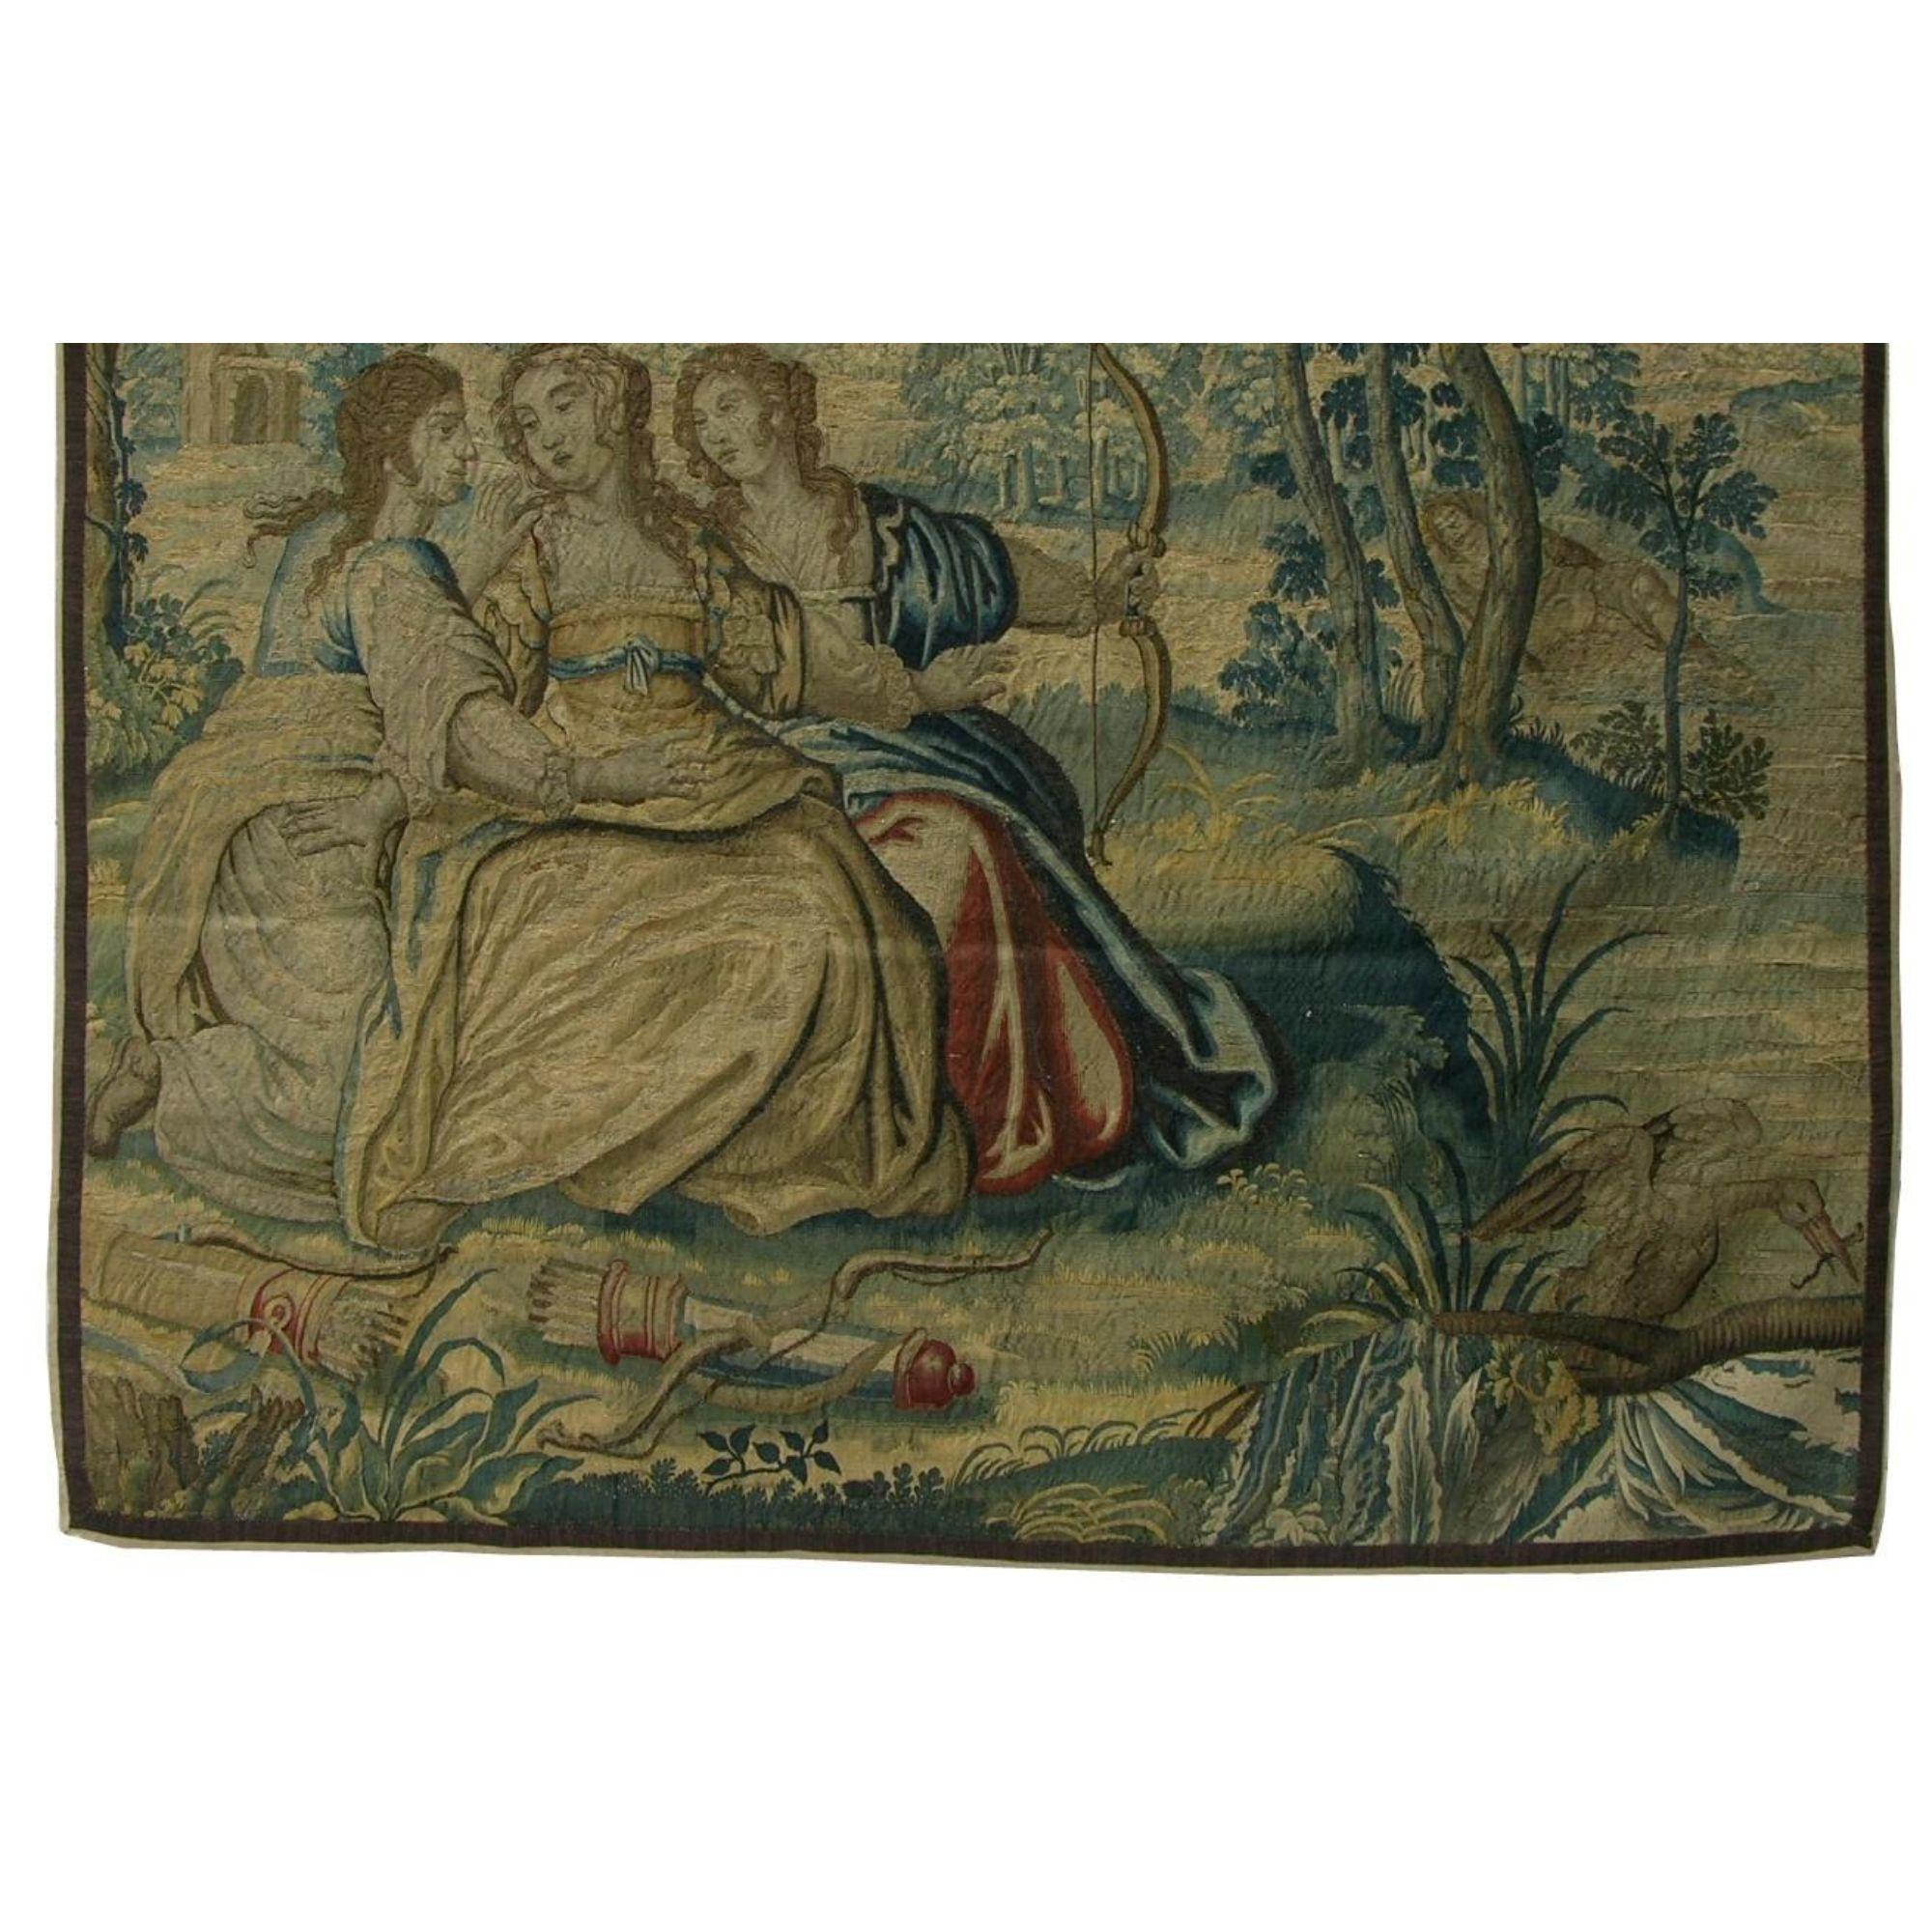 Unknown 17th Century Antique Brussel Tapestry 7'8